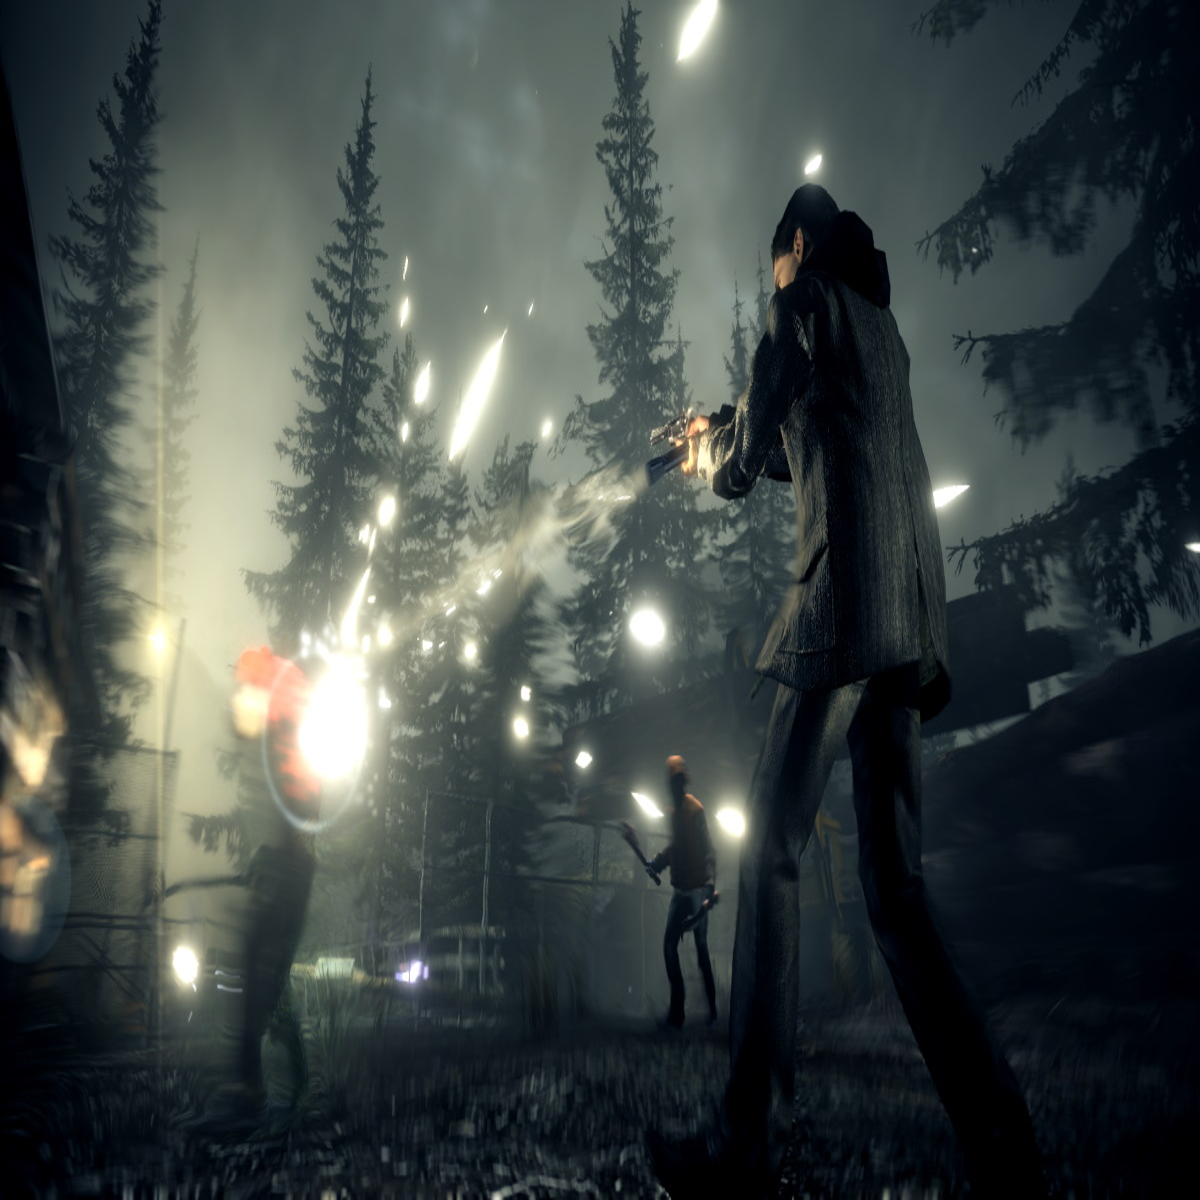 Alan Wake Remastered' Spoiler-Free Review: A Captivating Story Trapped in  All-Consuming Darkness